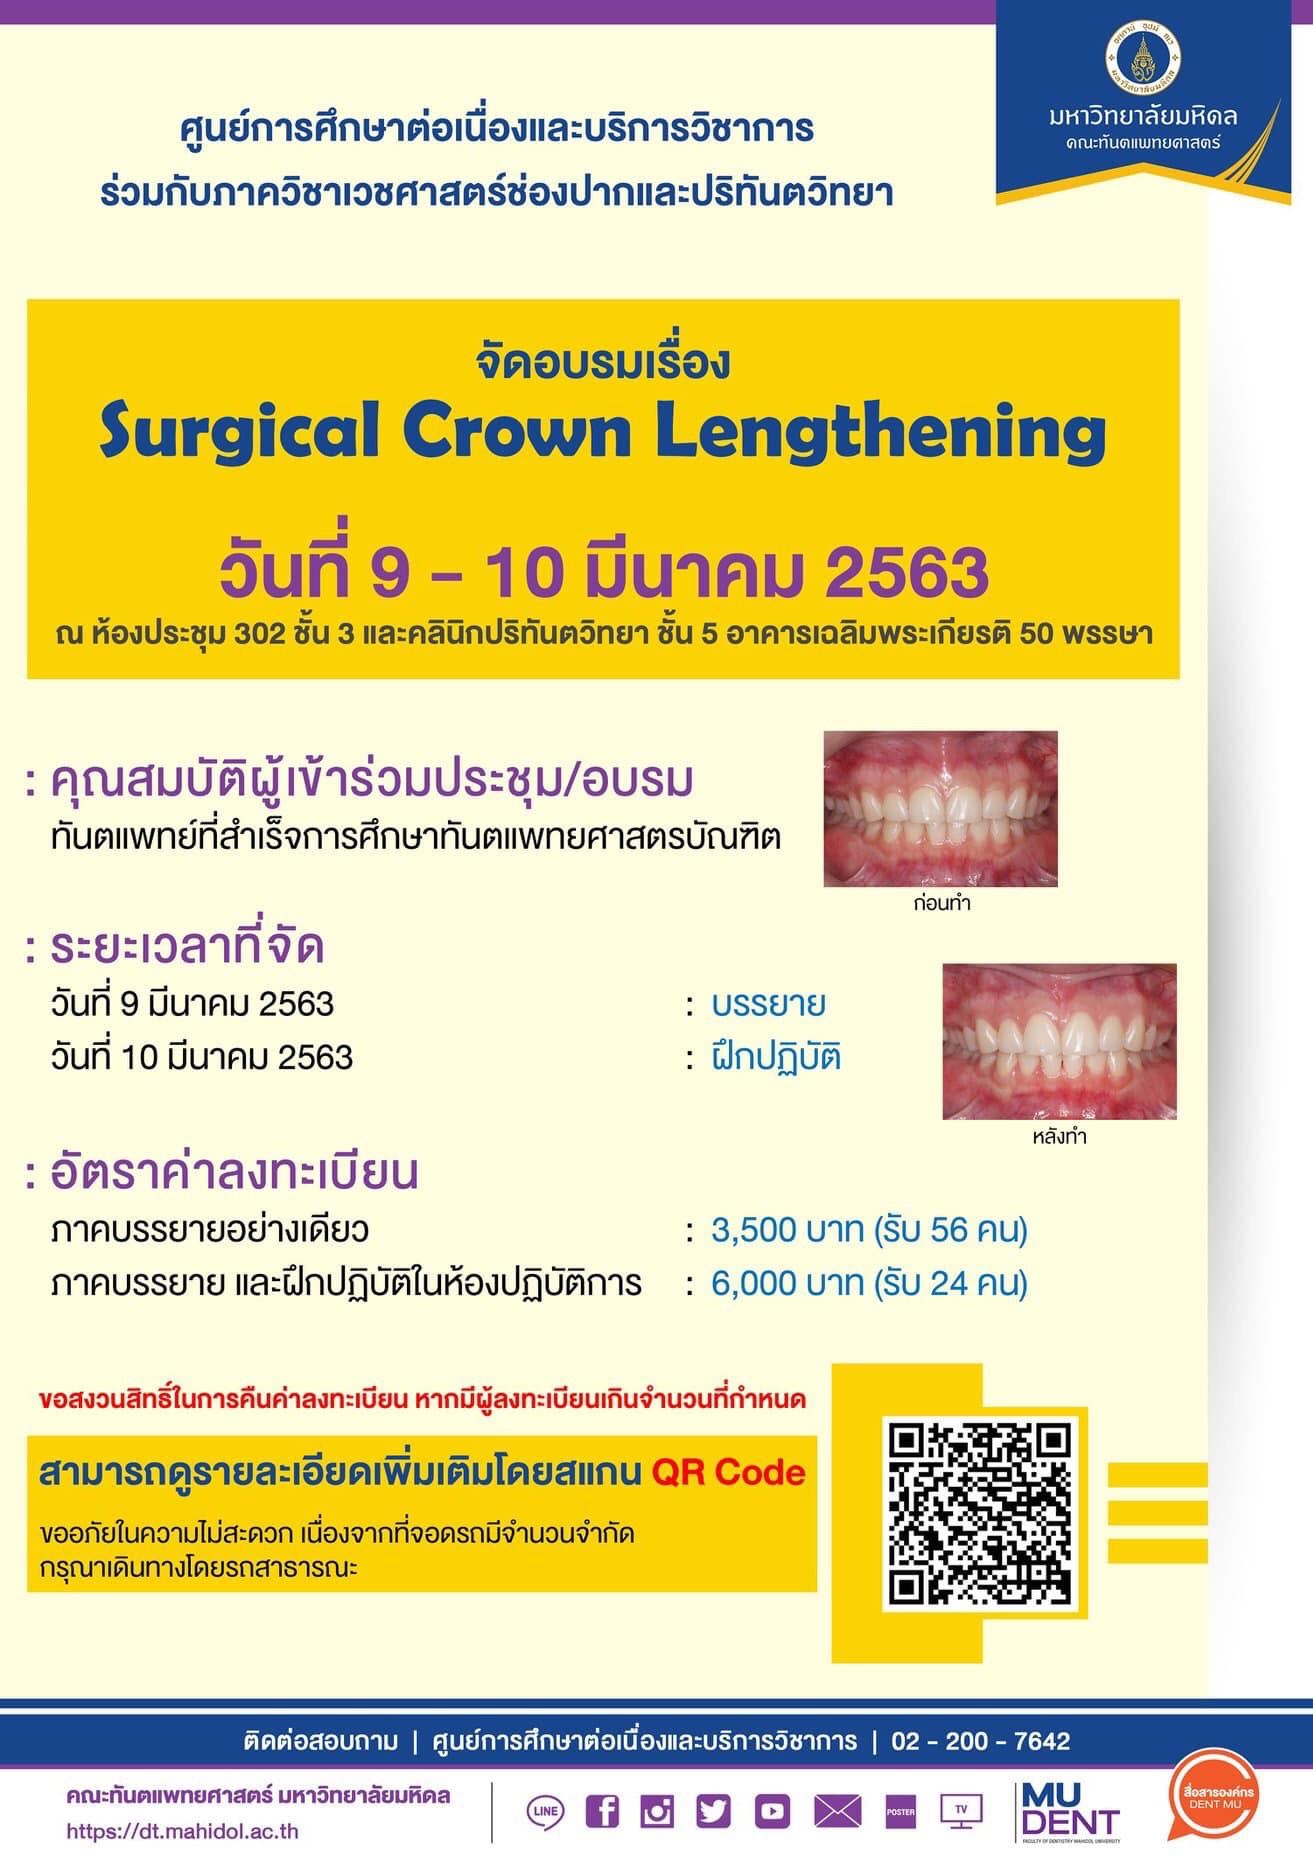 Surgical Crown Lengthening